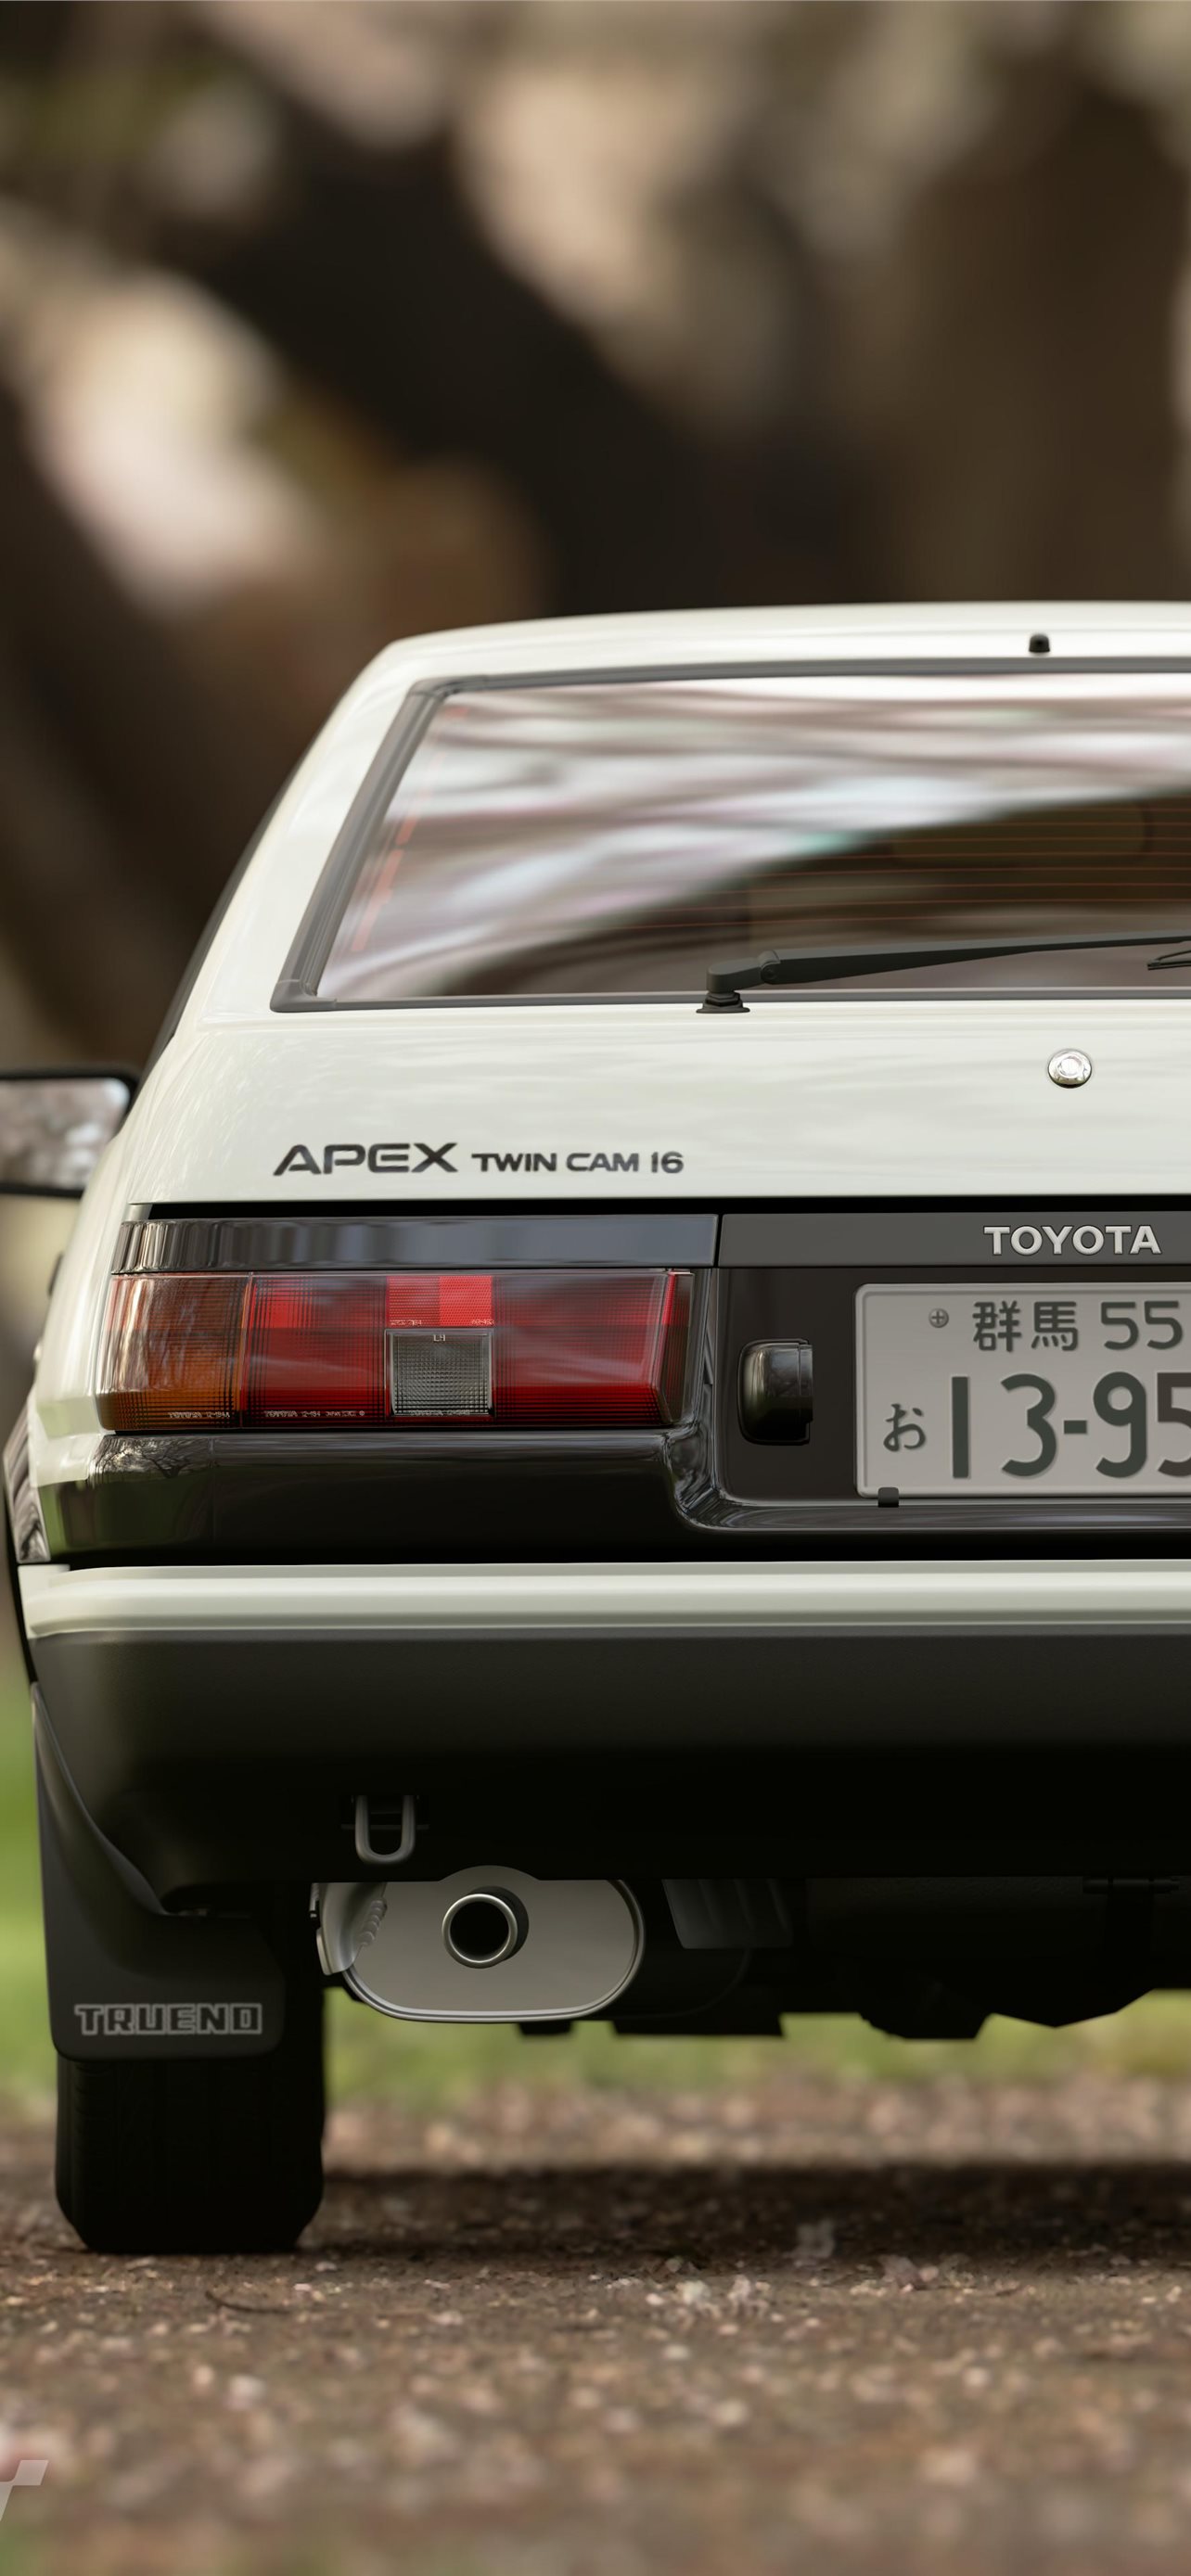 Toyota AE86 HD Wallpapers and Backgrounds